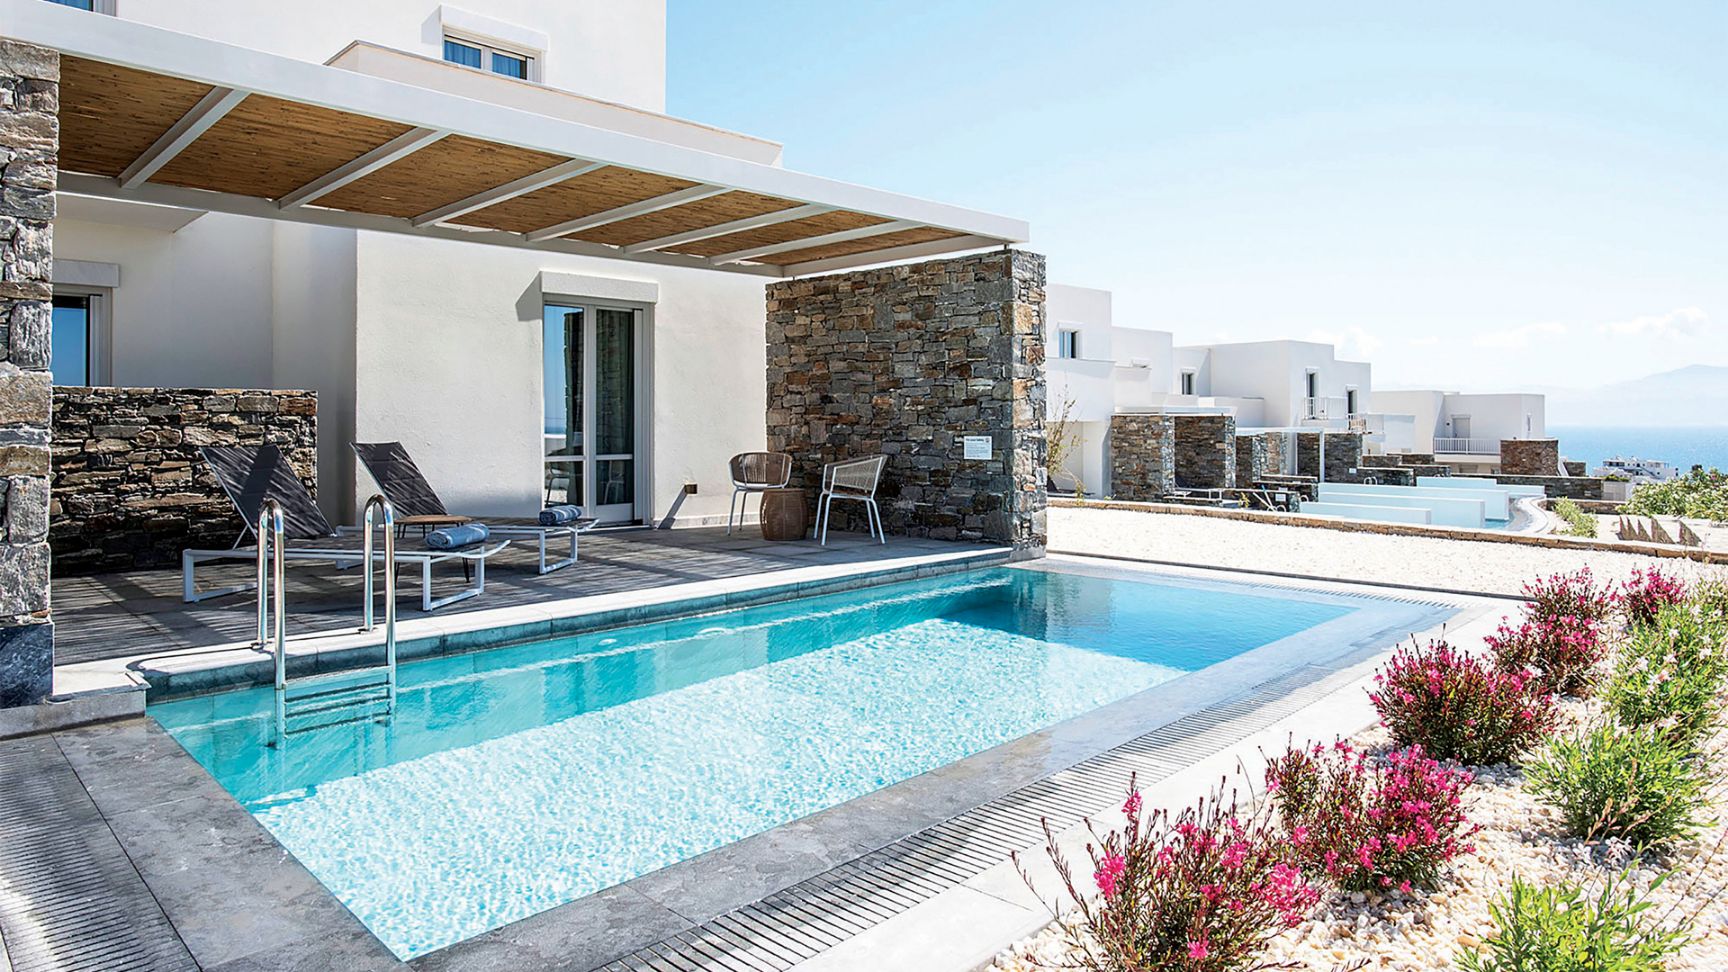 EKTER SA prepares for the 5* resort investment in Kolymbithres, Paros